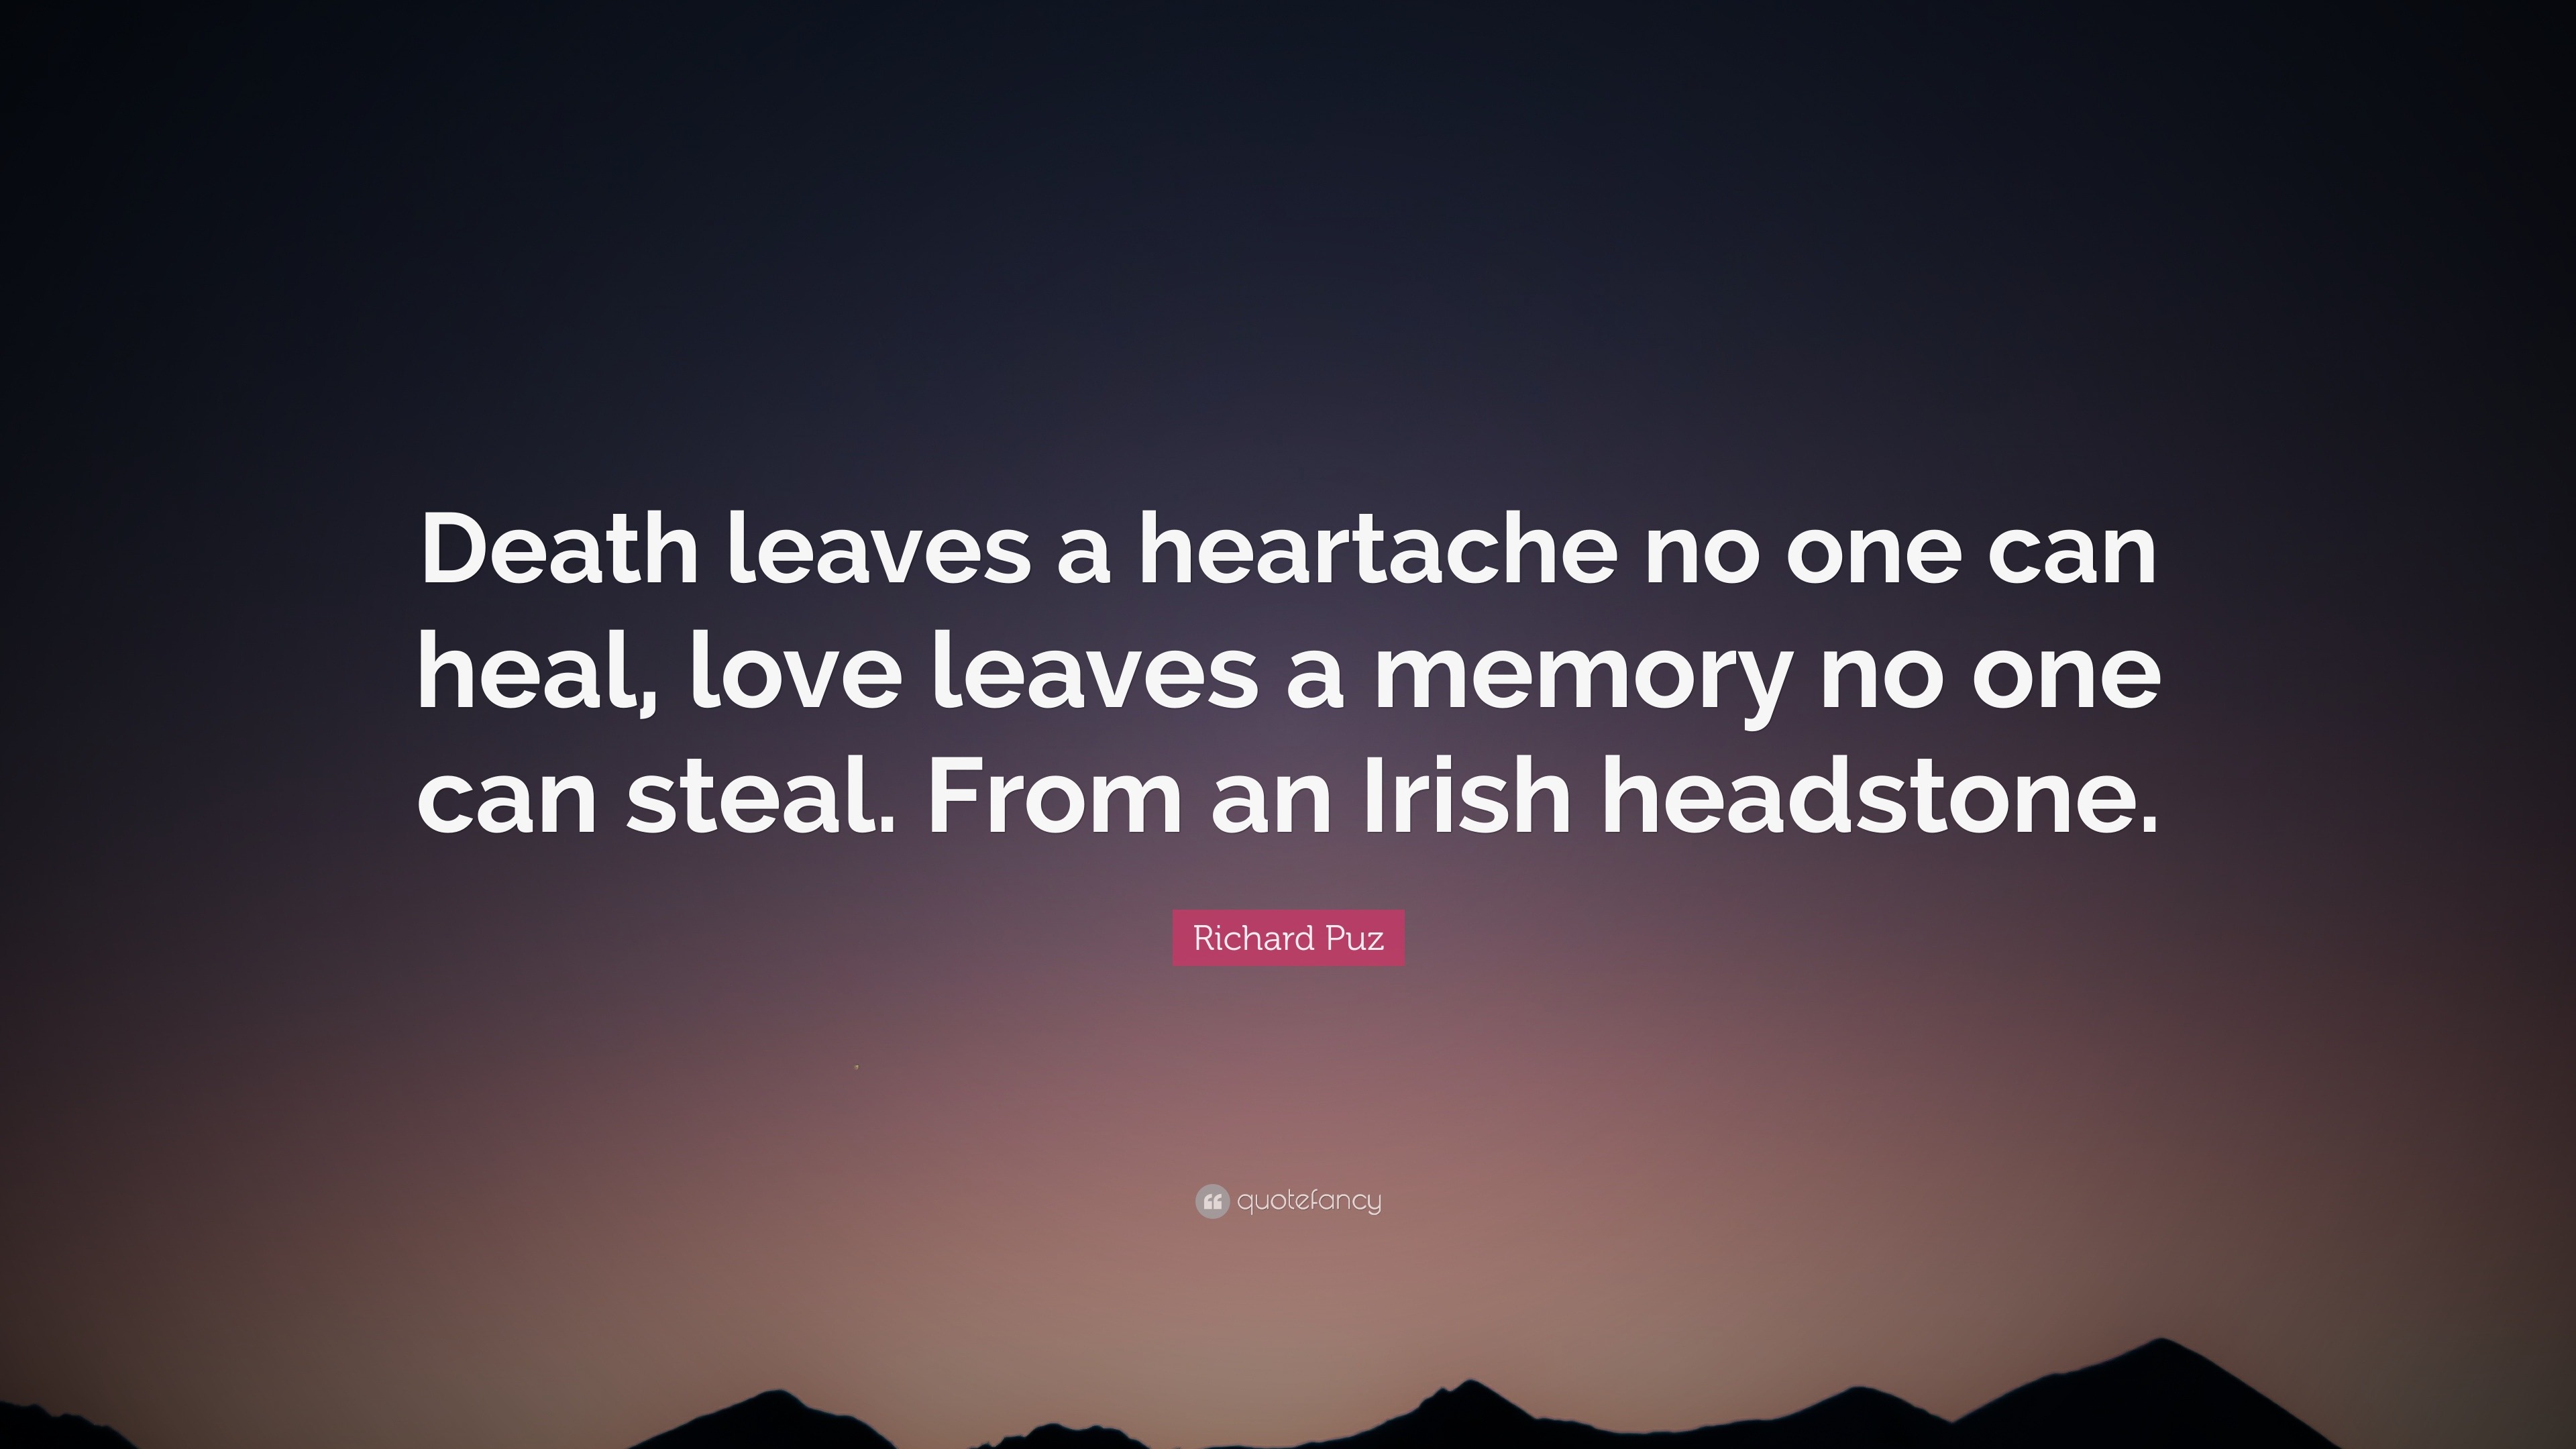 Richard Puz Quote: “Death leaves a heartache no one can heal, love ...